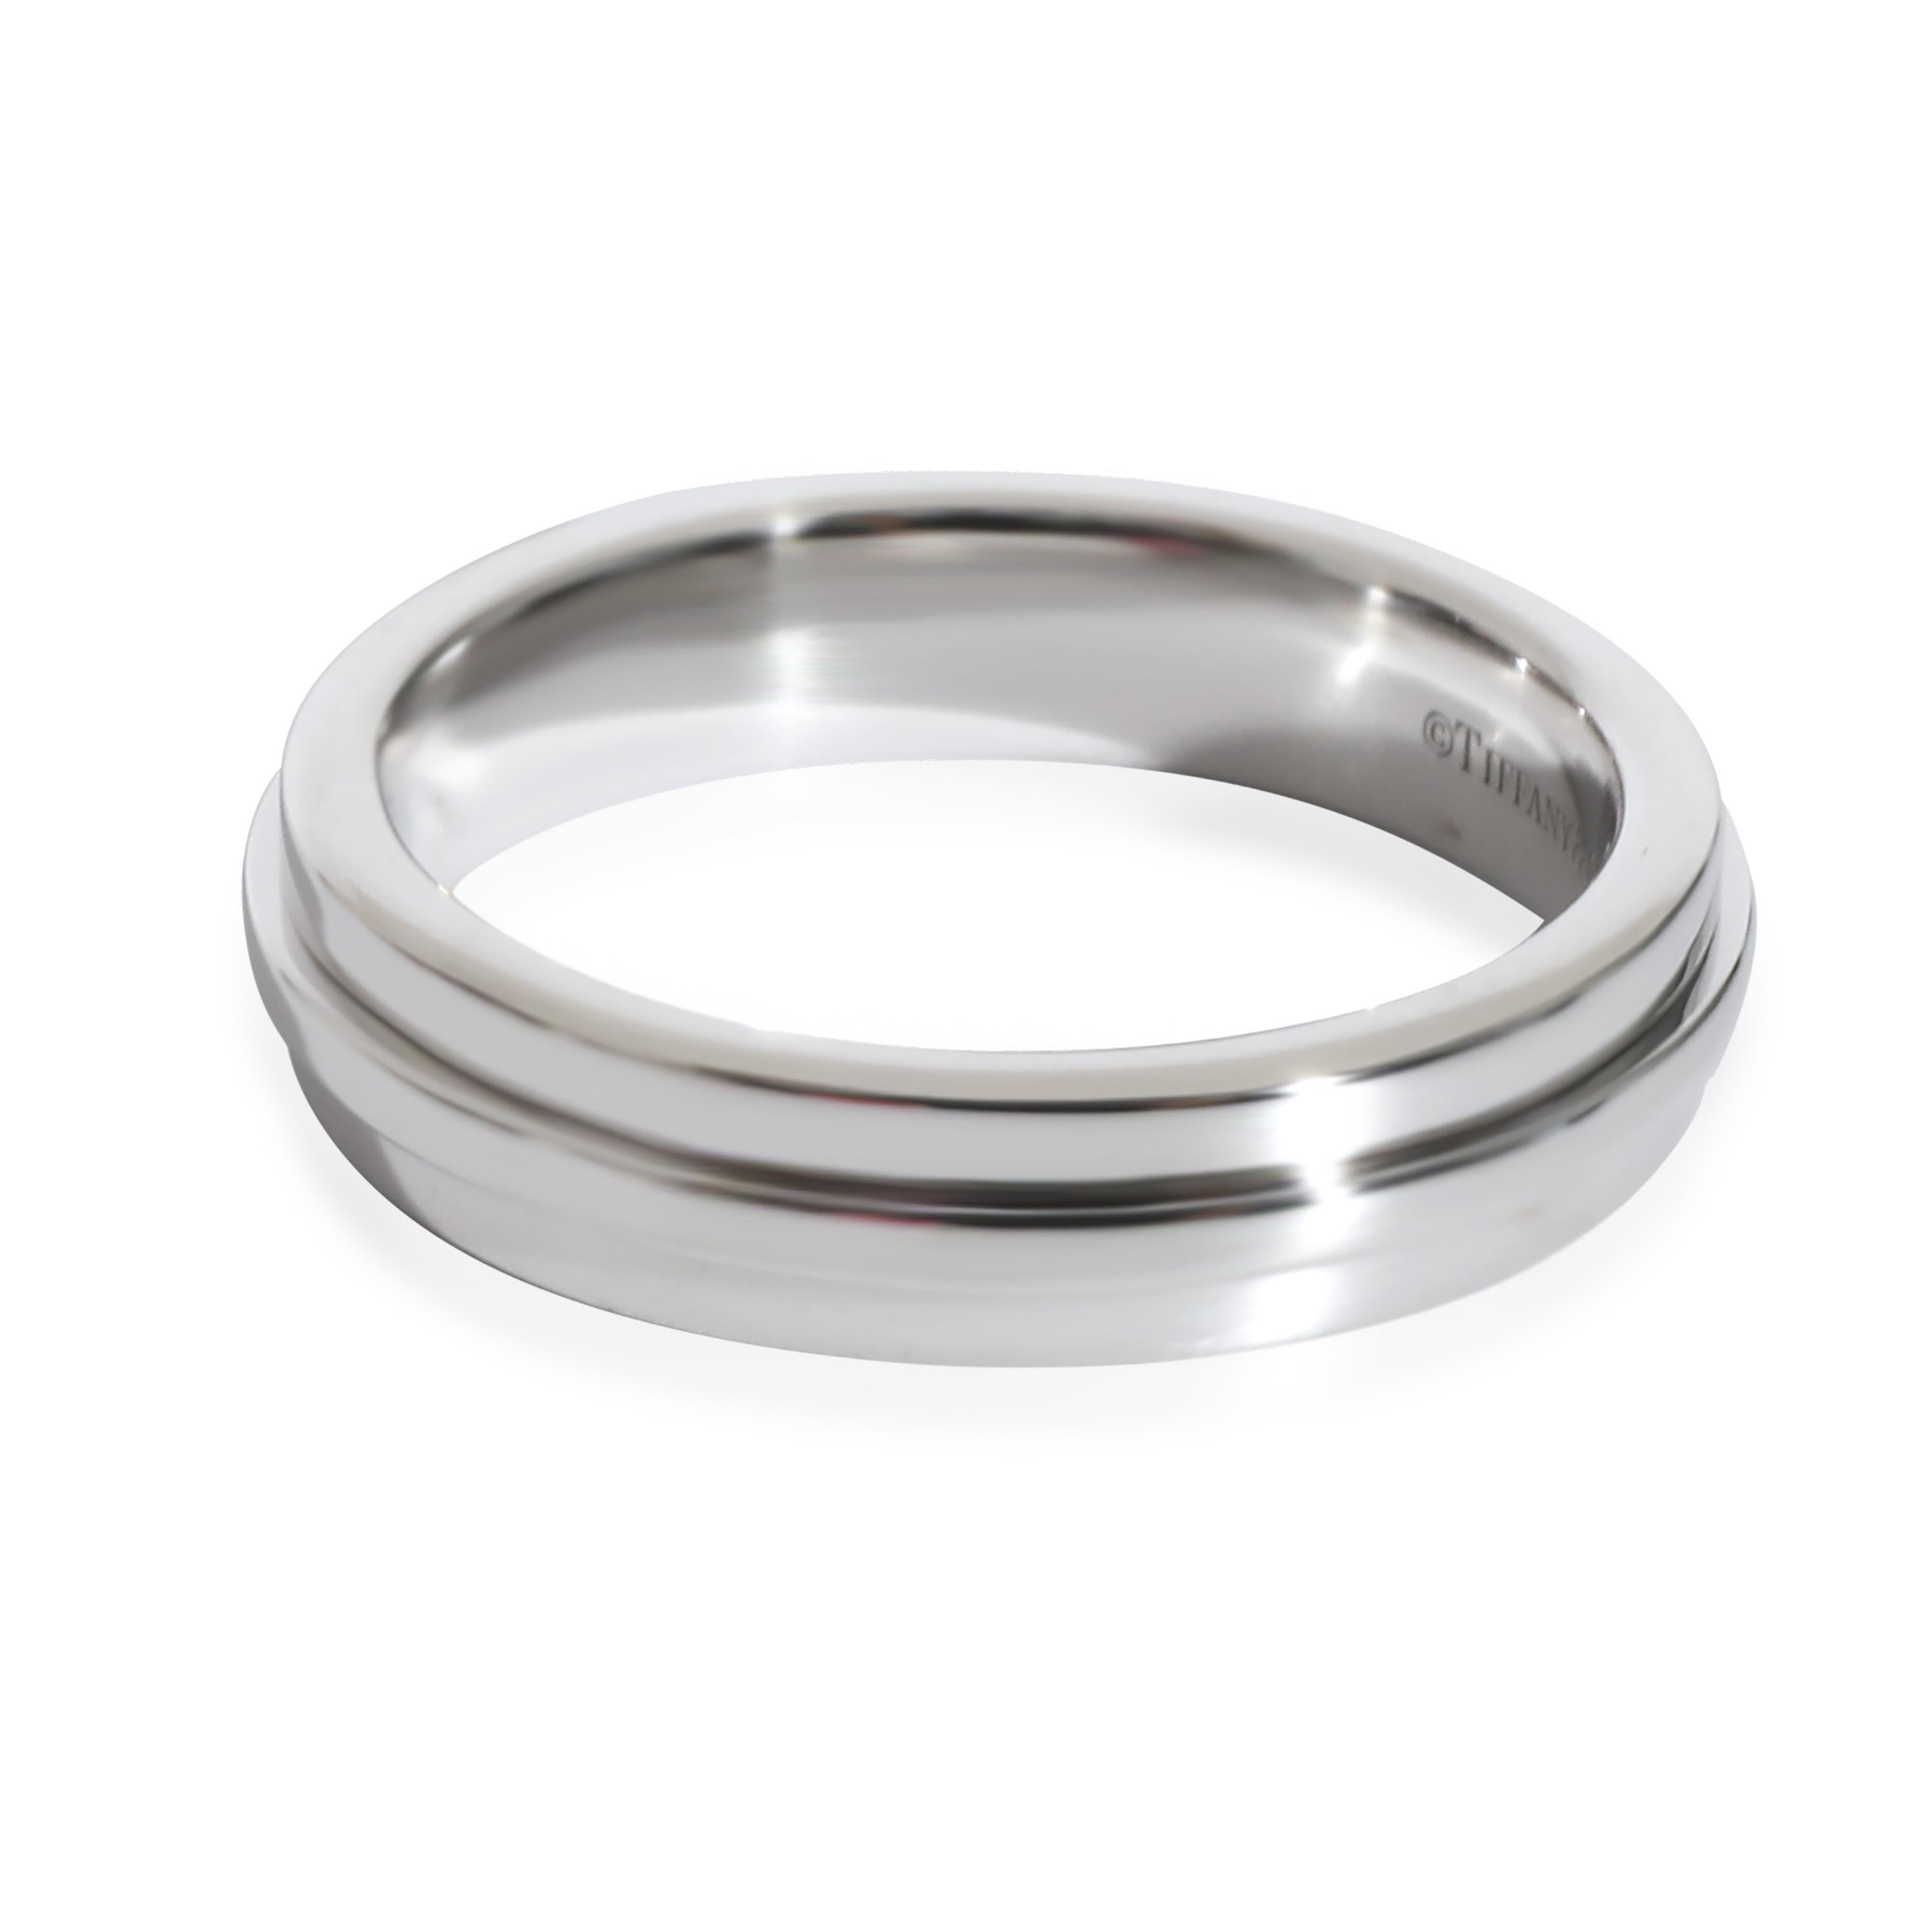 Tiffany & Co. Tiffany T Narrow Ring in 18k White Gold

PRIMARY DETAILS
SKU: 135497
Listing Title: Tiffany & Co. Tiffany T Narrow Ring in 18k White Gold
Condition Description: Inspired by the 'T' motif that Tiffany has been incorporating since the